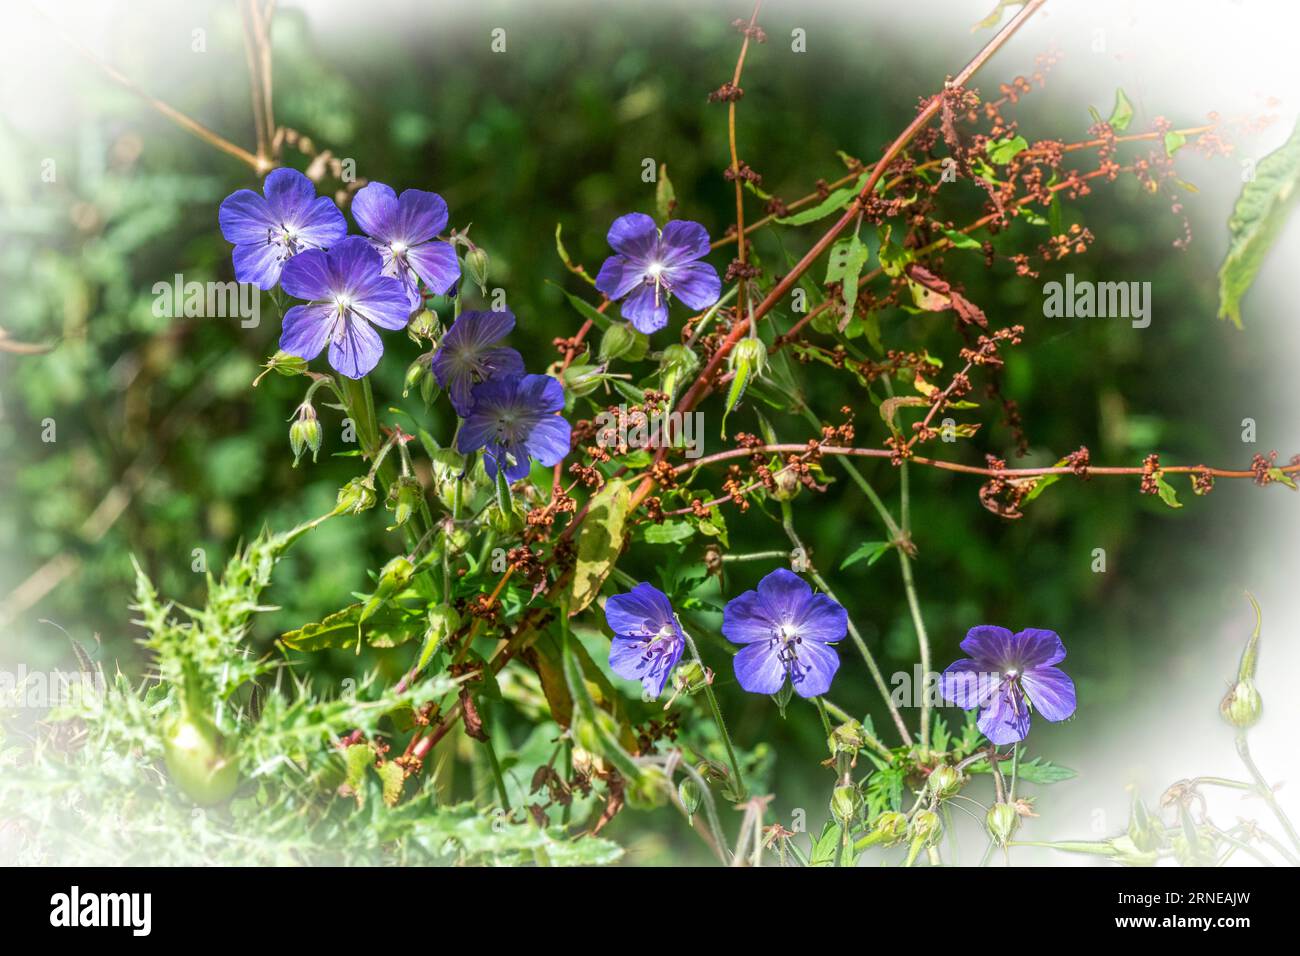 Wild geranium and dock plant with seeds growing in a woodland setting Stock Photo